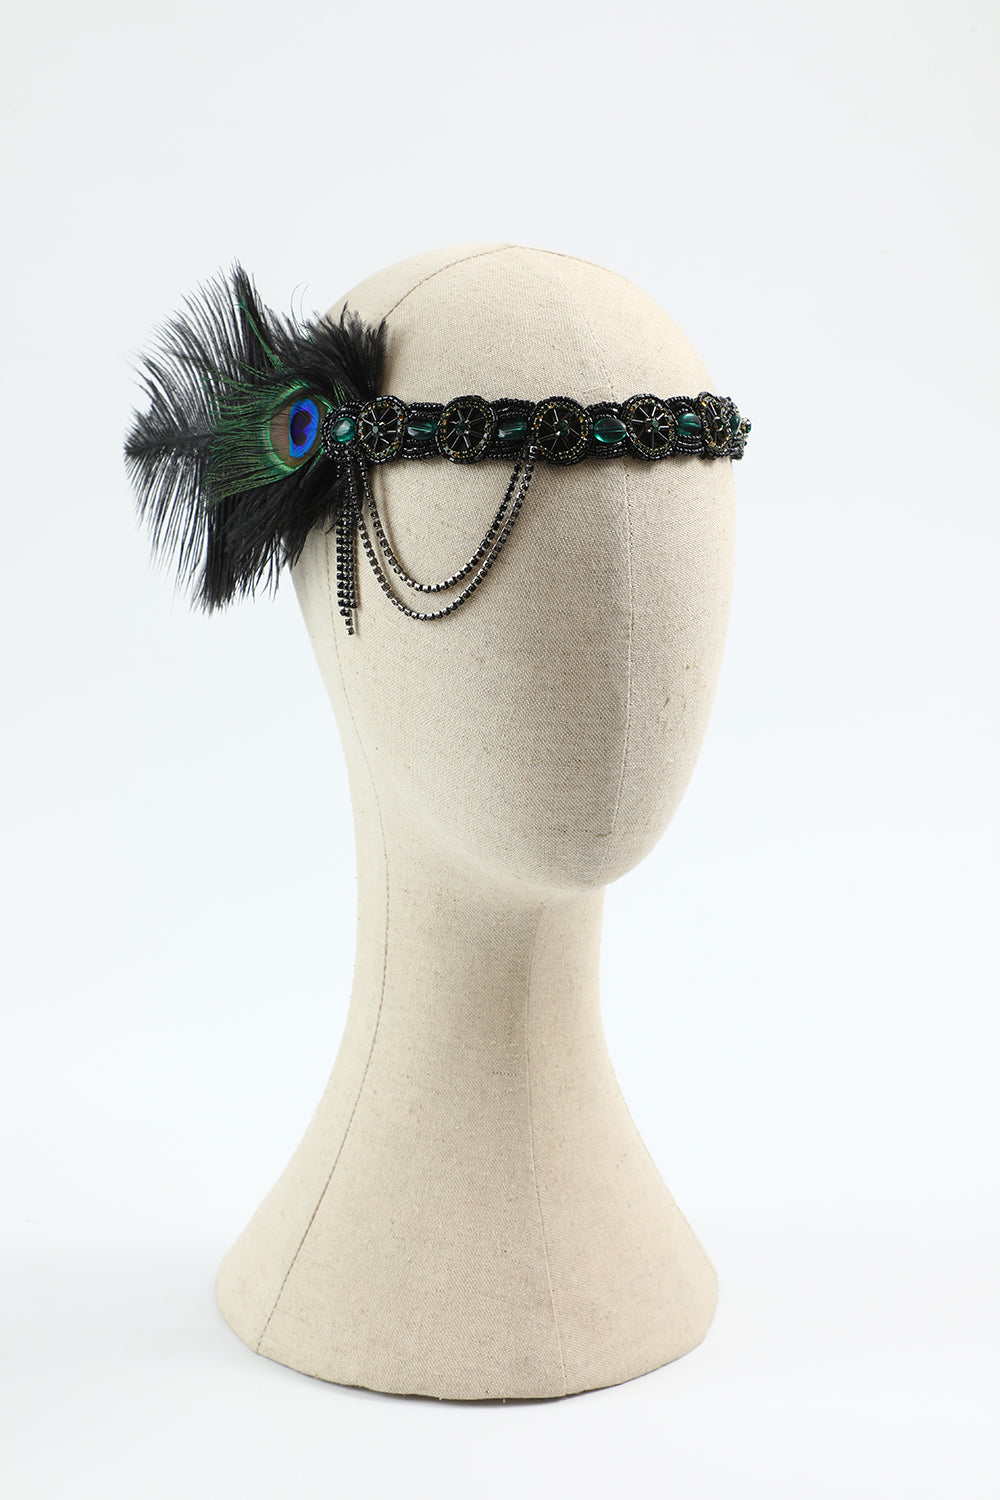 1920s Themed Five Pieces Party Accessories Sets